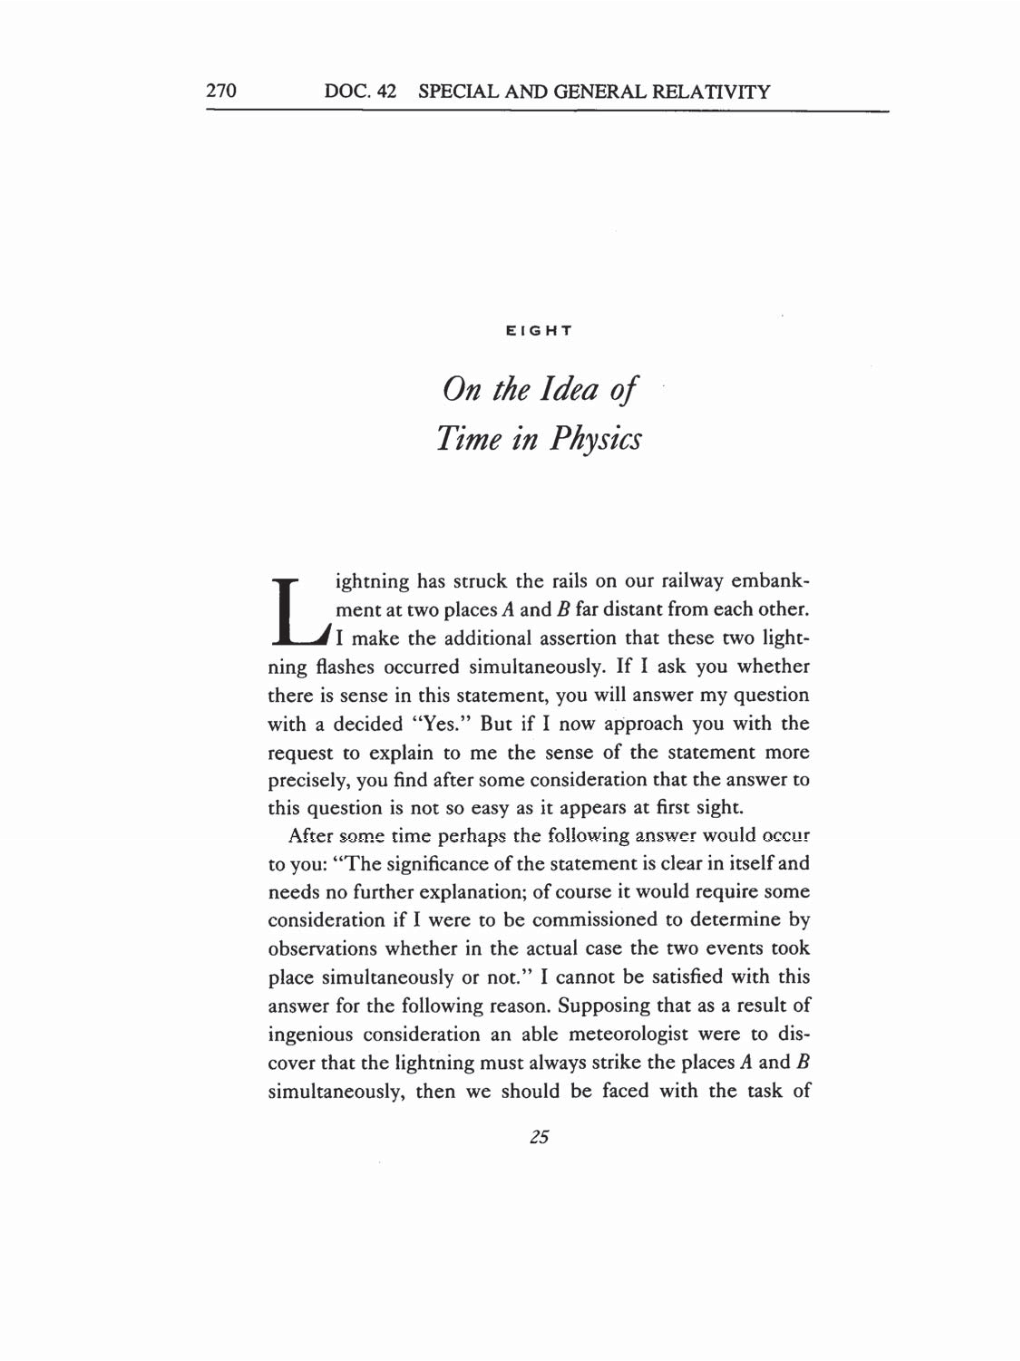 Volume 6: The Berlin Years: Writings, 1914-1917 (English translation supplement) page 270